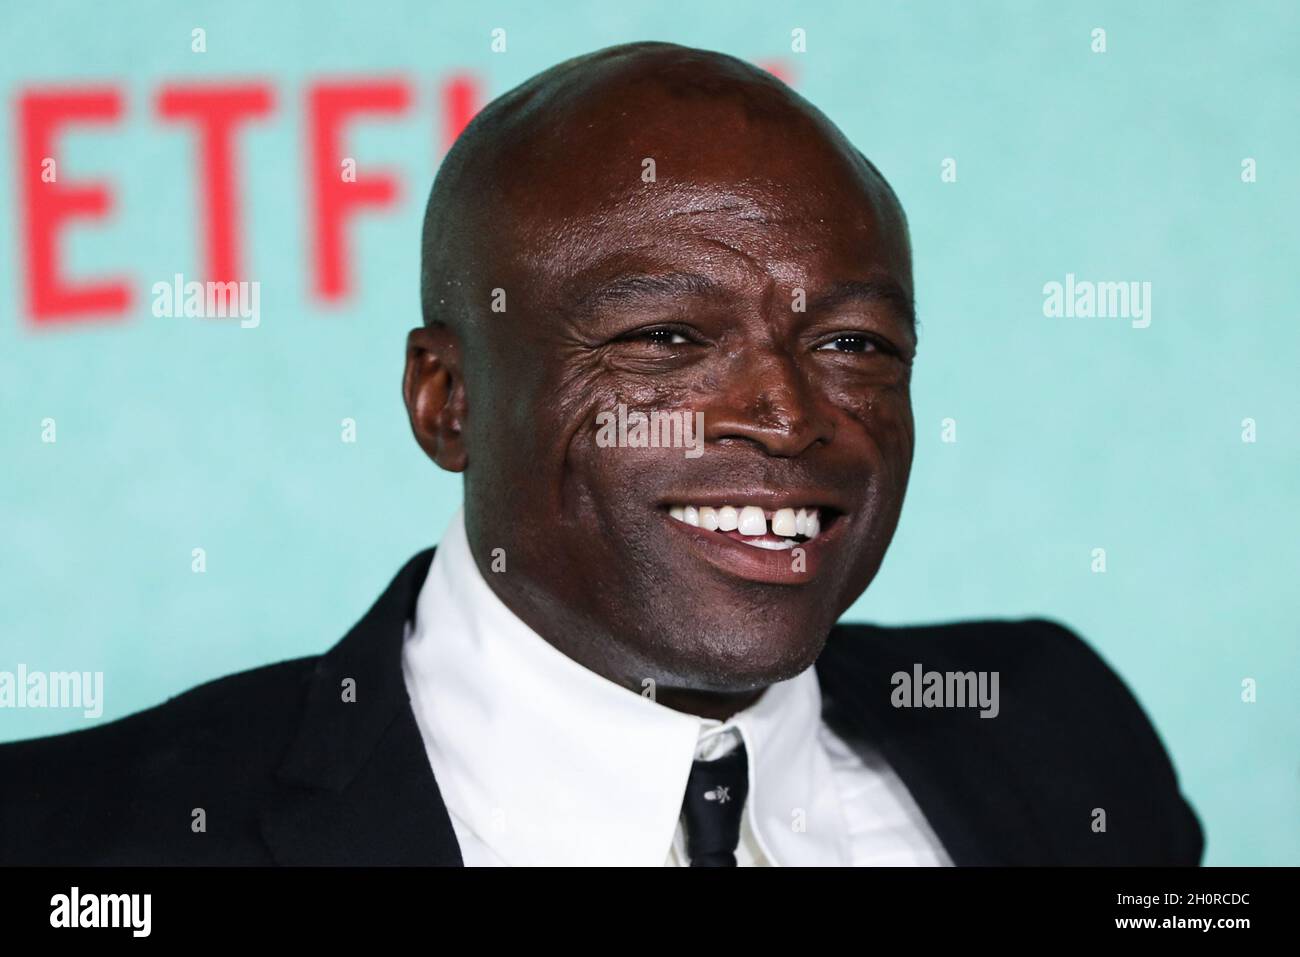 Los Angeles, United States. 13th Oct, 2021. LOS ANGELES, CALIFORNIA, USA - OCTOBER 13: Singer-songwriter Seal (Henry Olusegun Adeola Samuel) arrives at the Los Angeles Premiere Of Netflix's 'The Harder They Fall' held at the Shrine Auditorium and Expo Hall on October 13, 2021 in Los Angeles, California, United States. (Photo by Xavier Collin/Image Press Agency/Sipa USA) Credit: Sipa USA/Alamy Live News Stock Photo